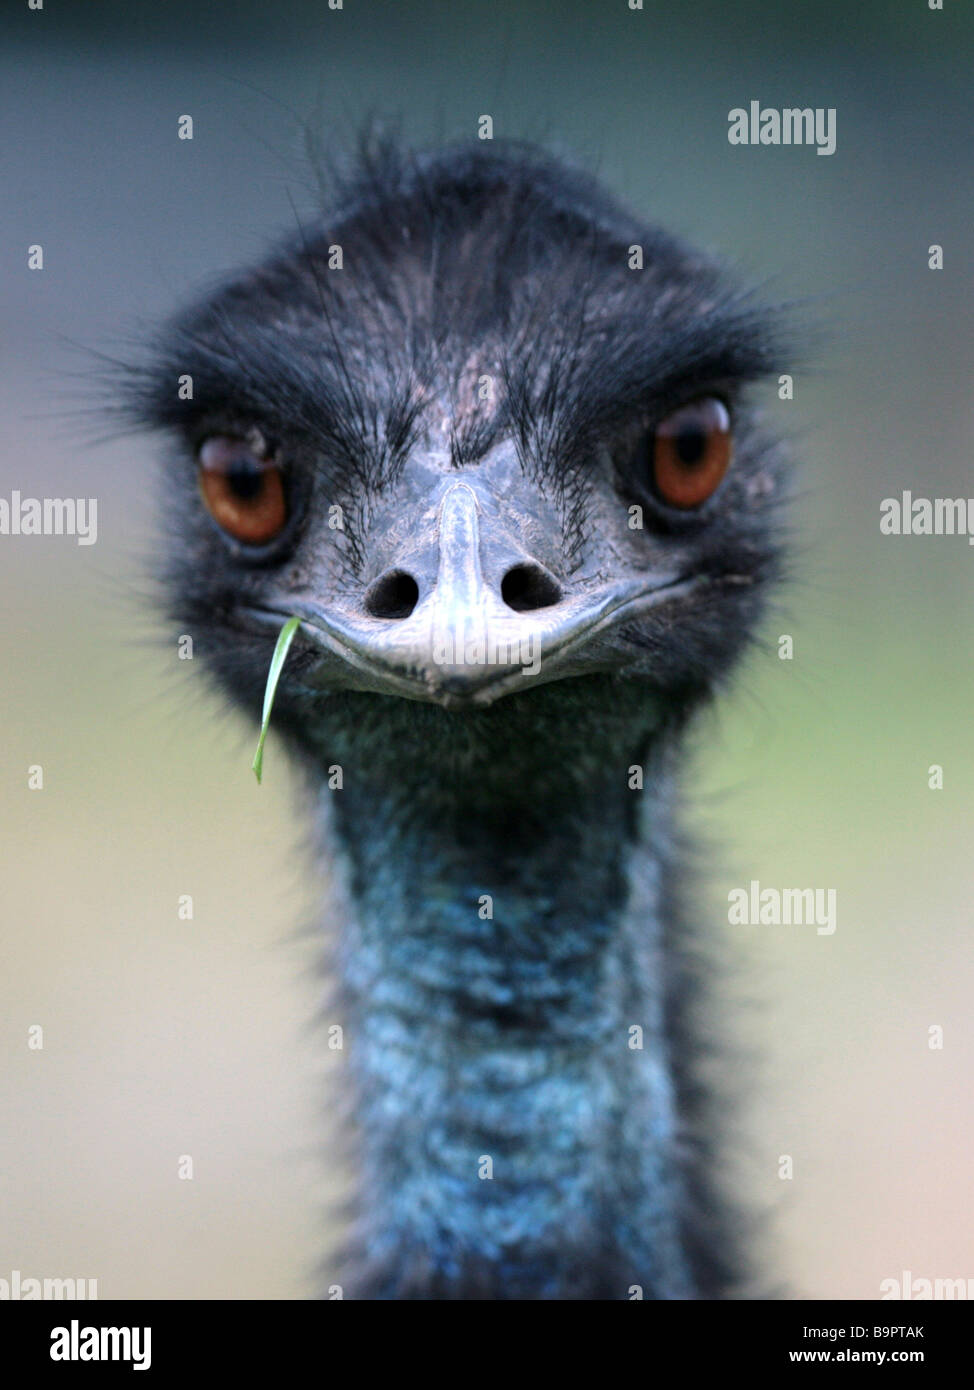 A portrait of an emu with a piece of grass in its mouth. Stock Photo